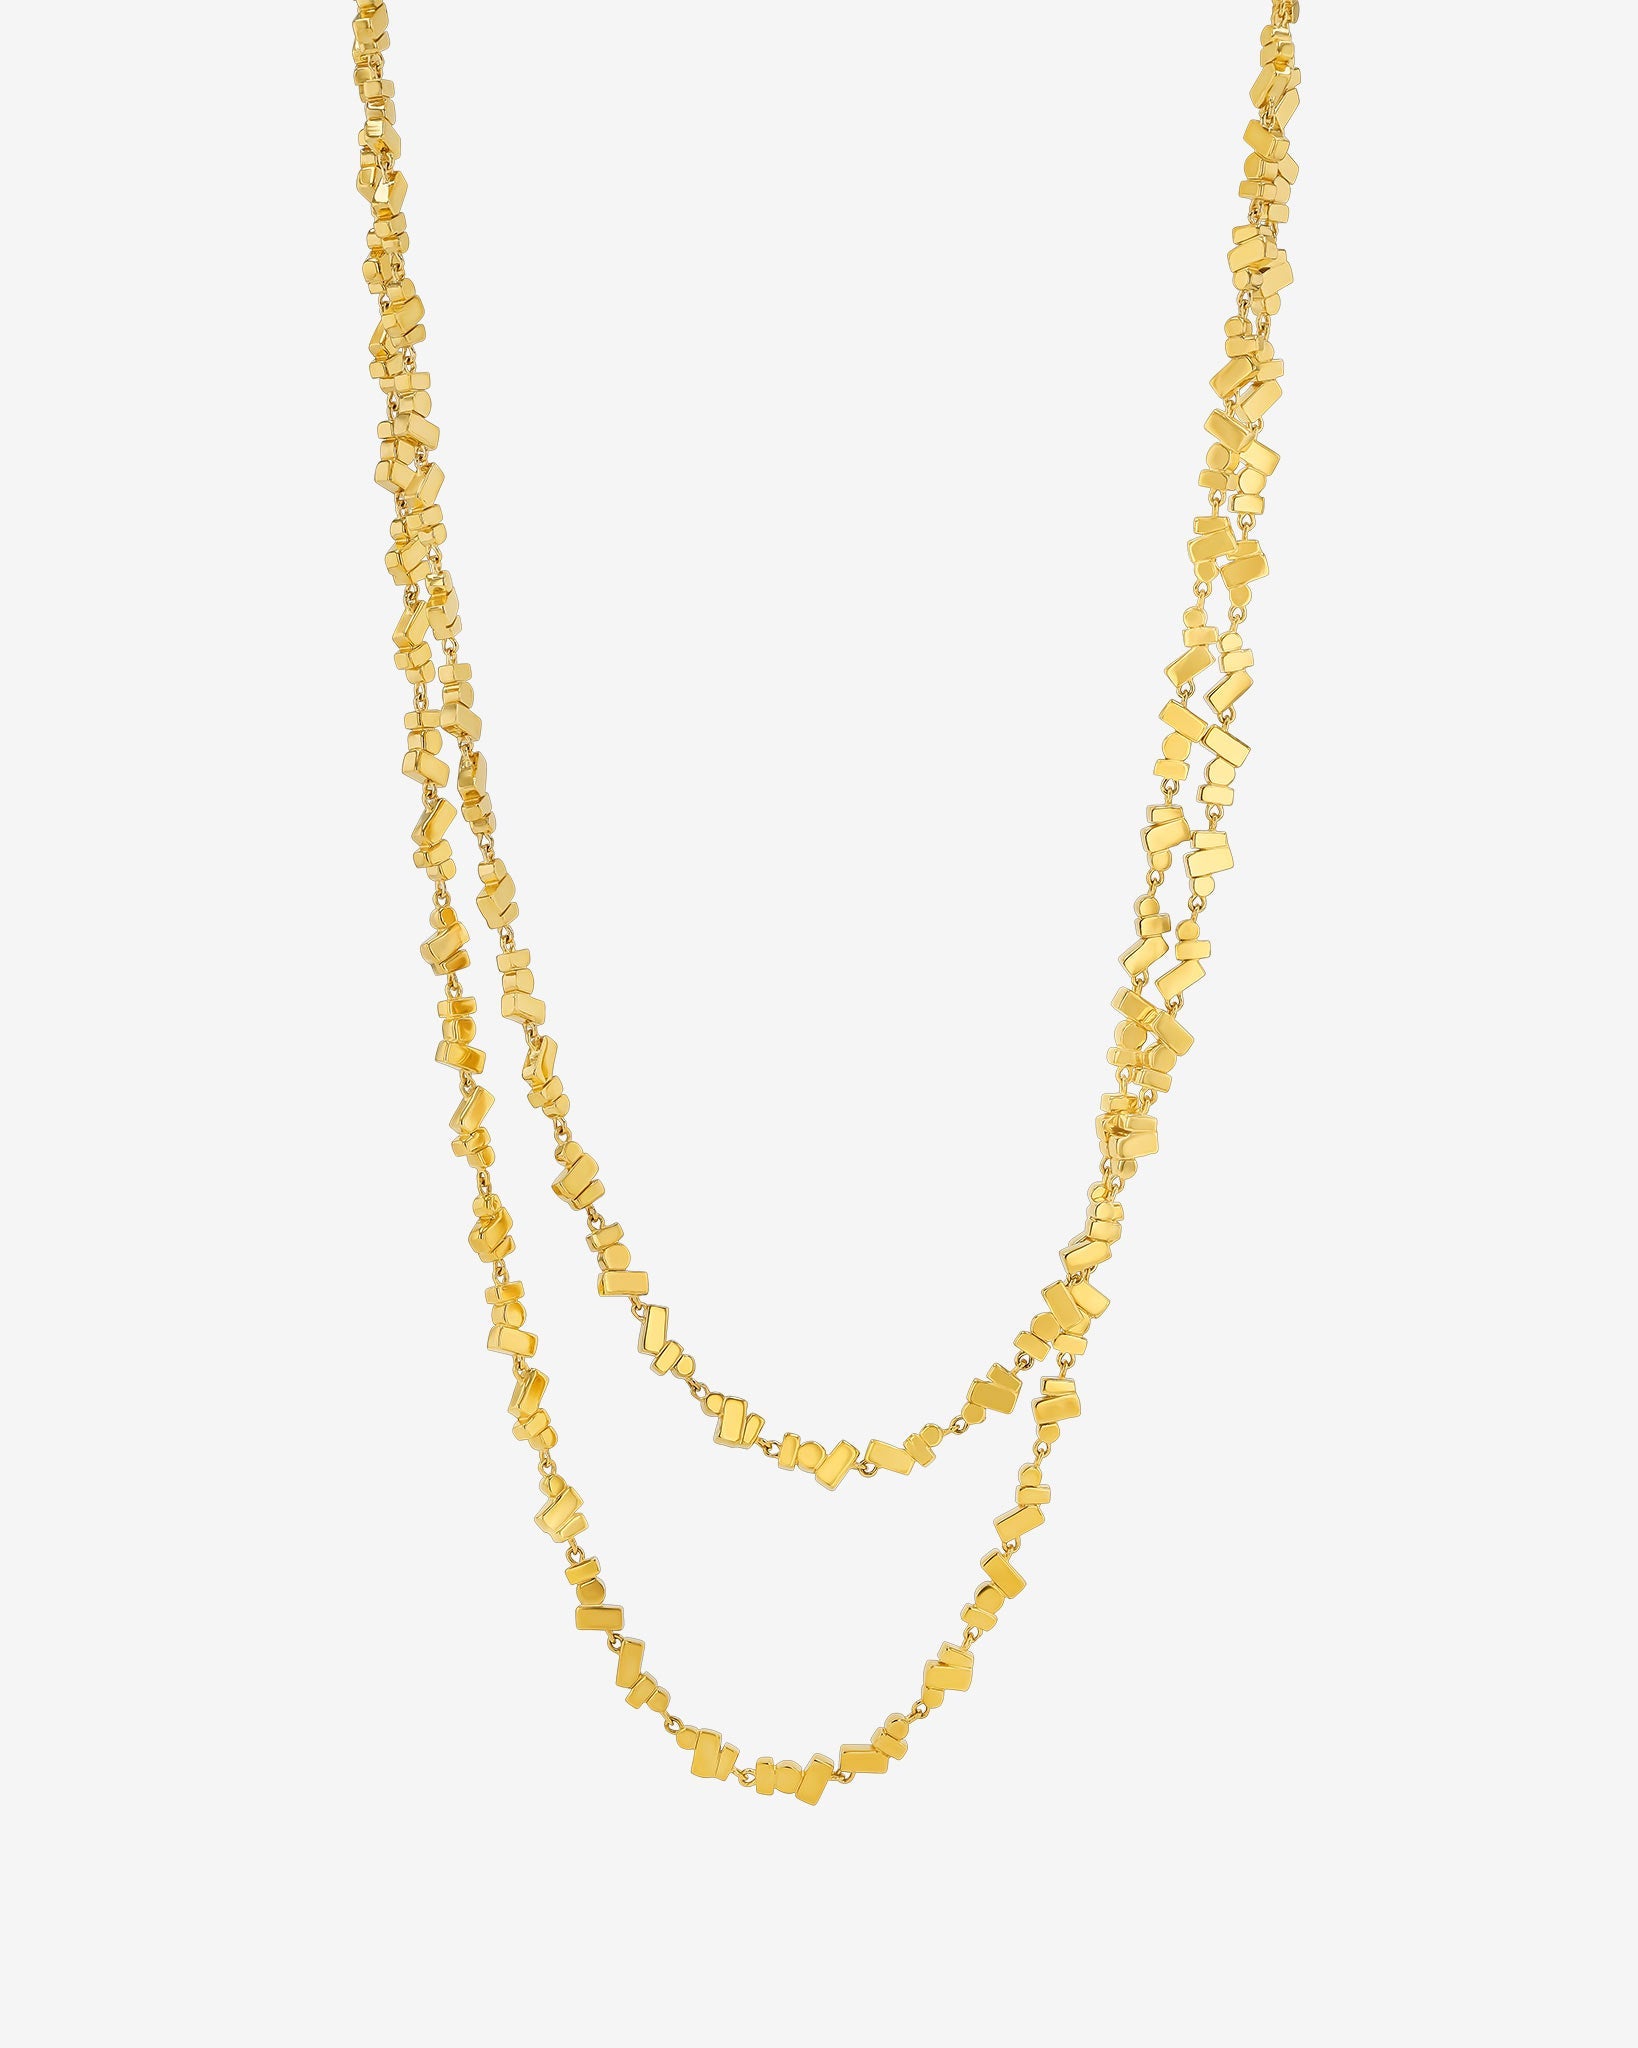 Suzanne Kalan Golden Cluster 36" Inch Tennis Necklace in 18k yellow gold